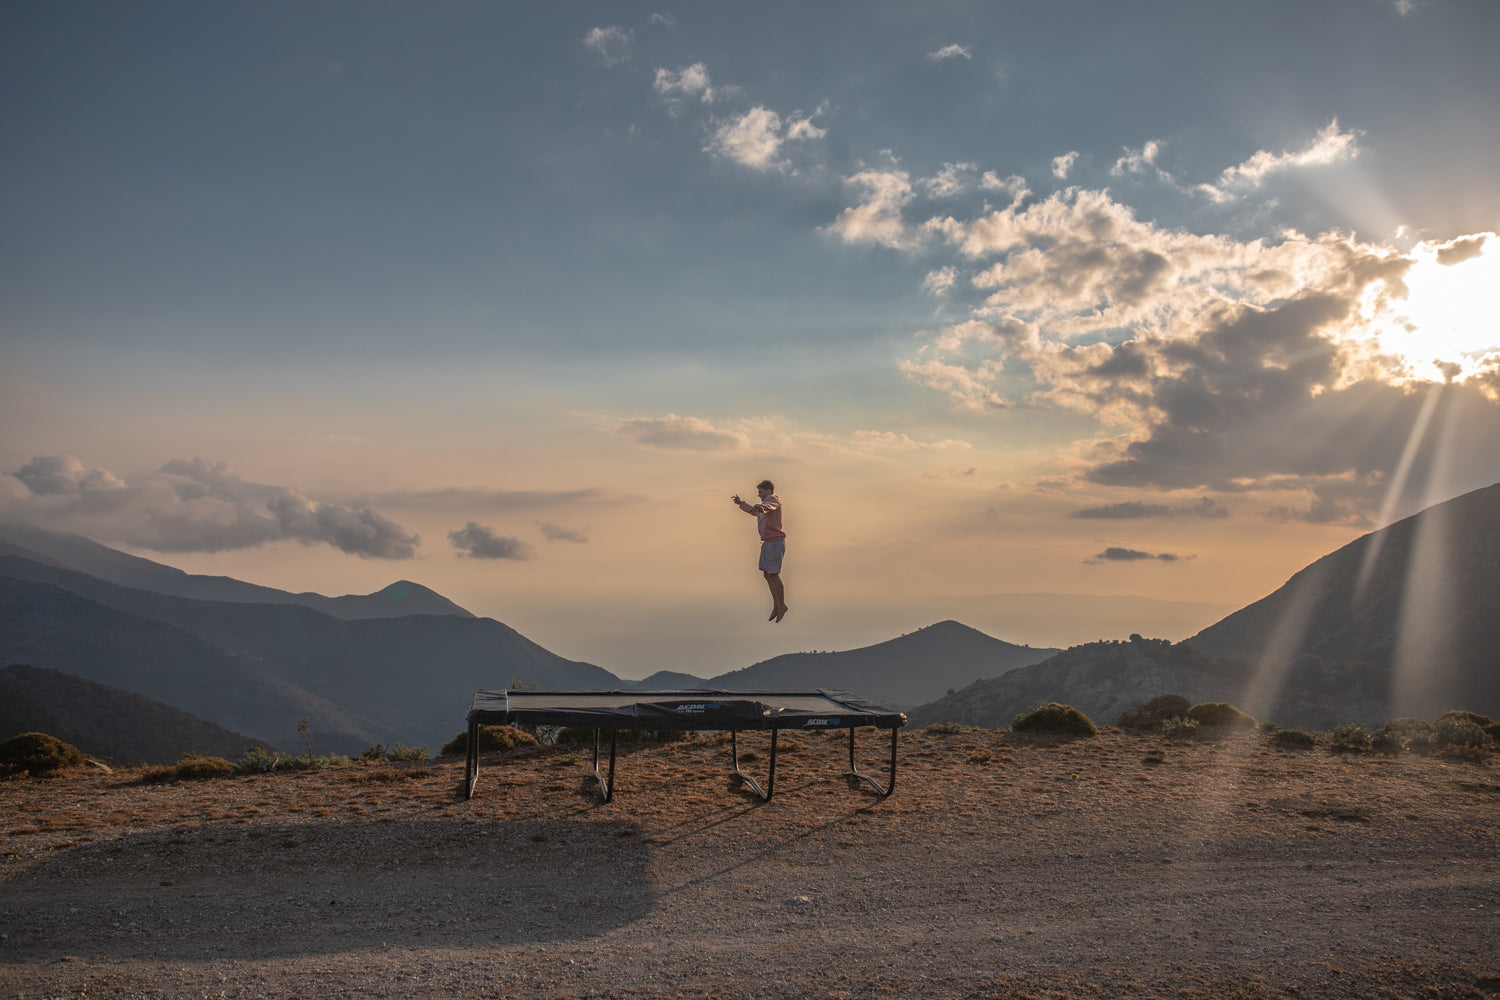 A guy jumping on an ACON trampoline outdoors with mountains and sunset as a background